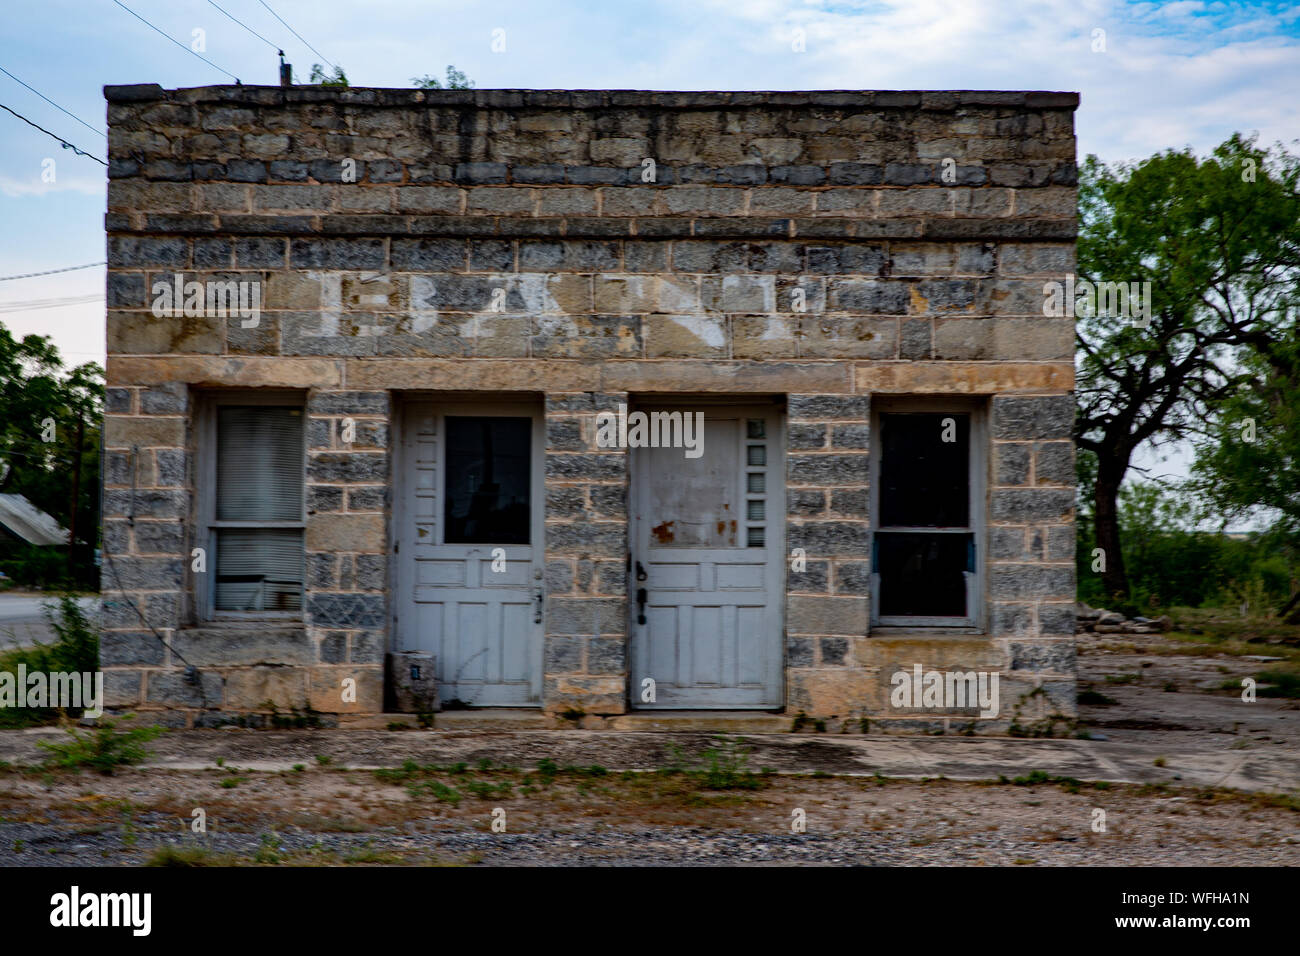 Ghost sign of old bank building in Paint Rock, Texas, built in 1870. Stock Photo